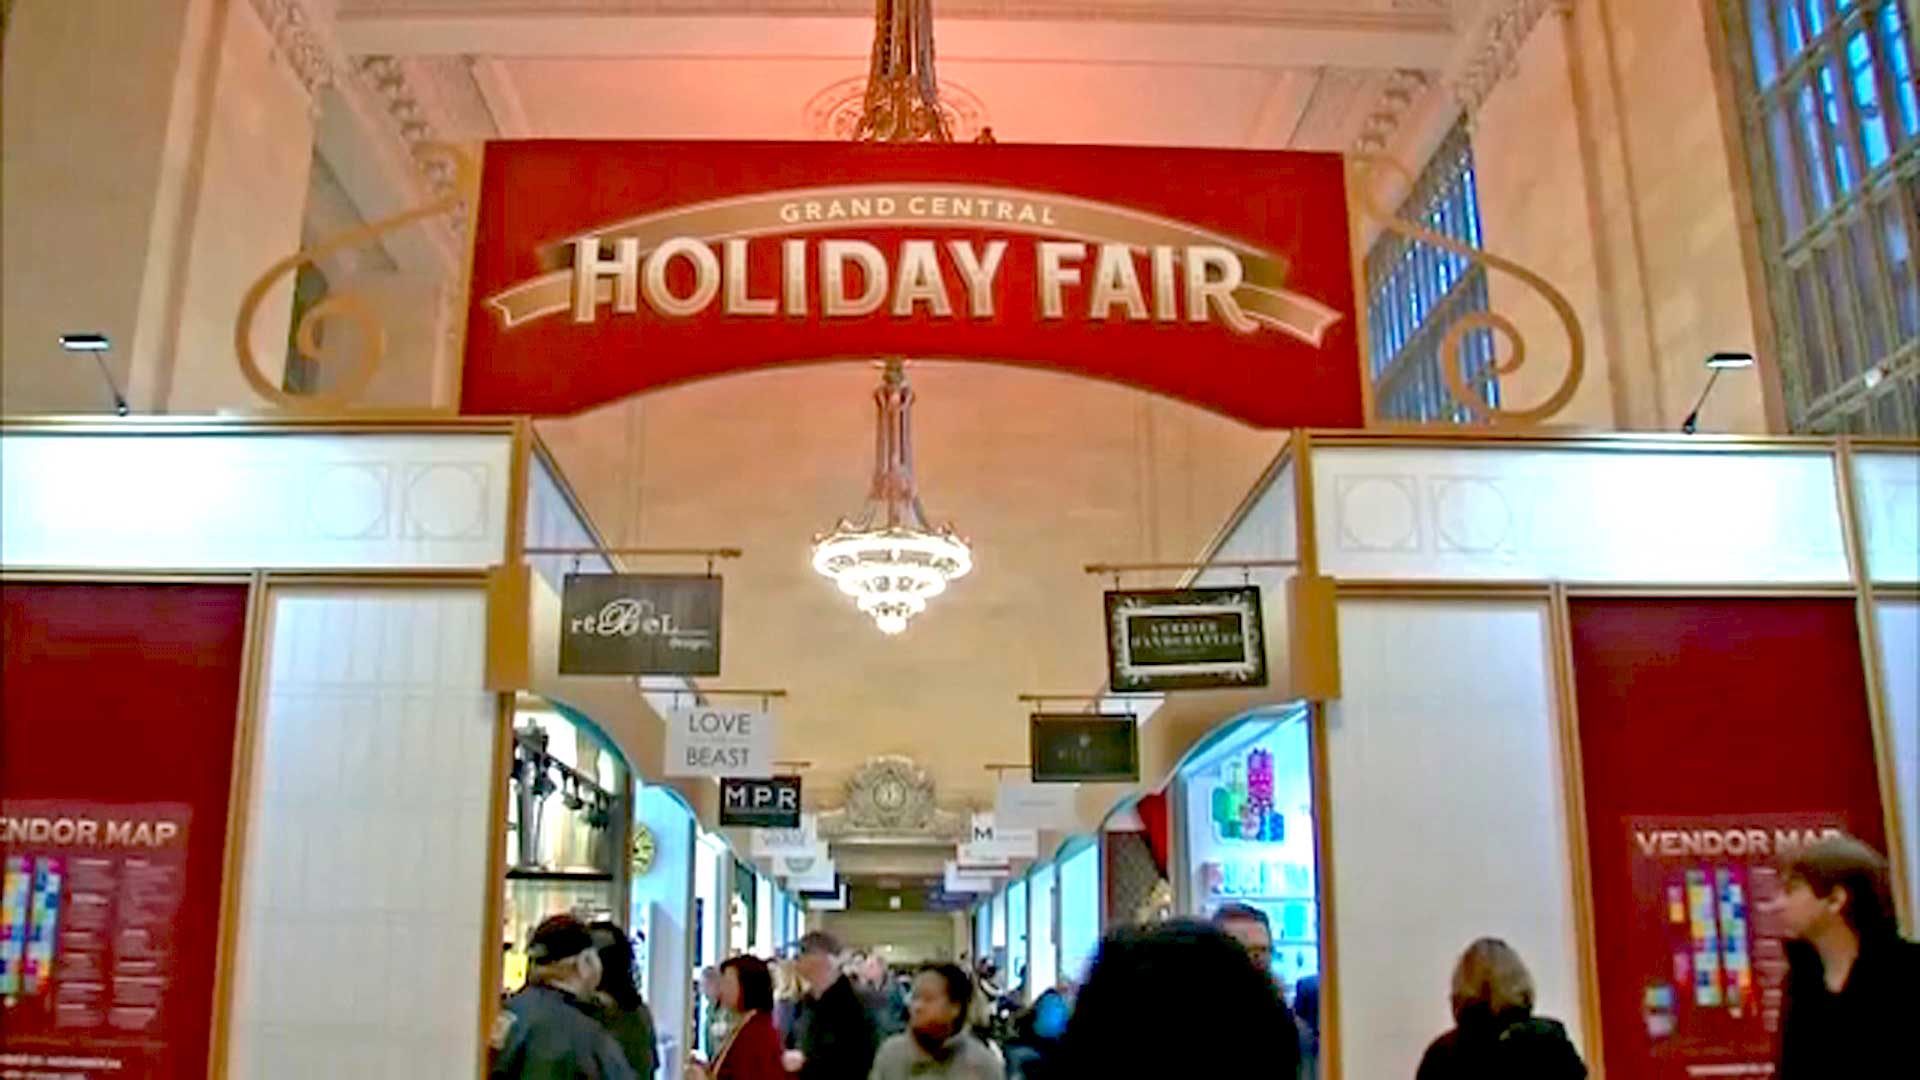 Holiday Fair returns to Grand Central after a 2-year hiatus